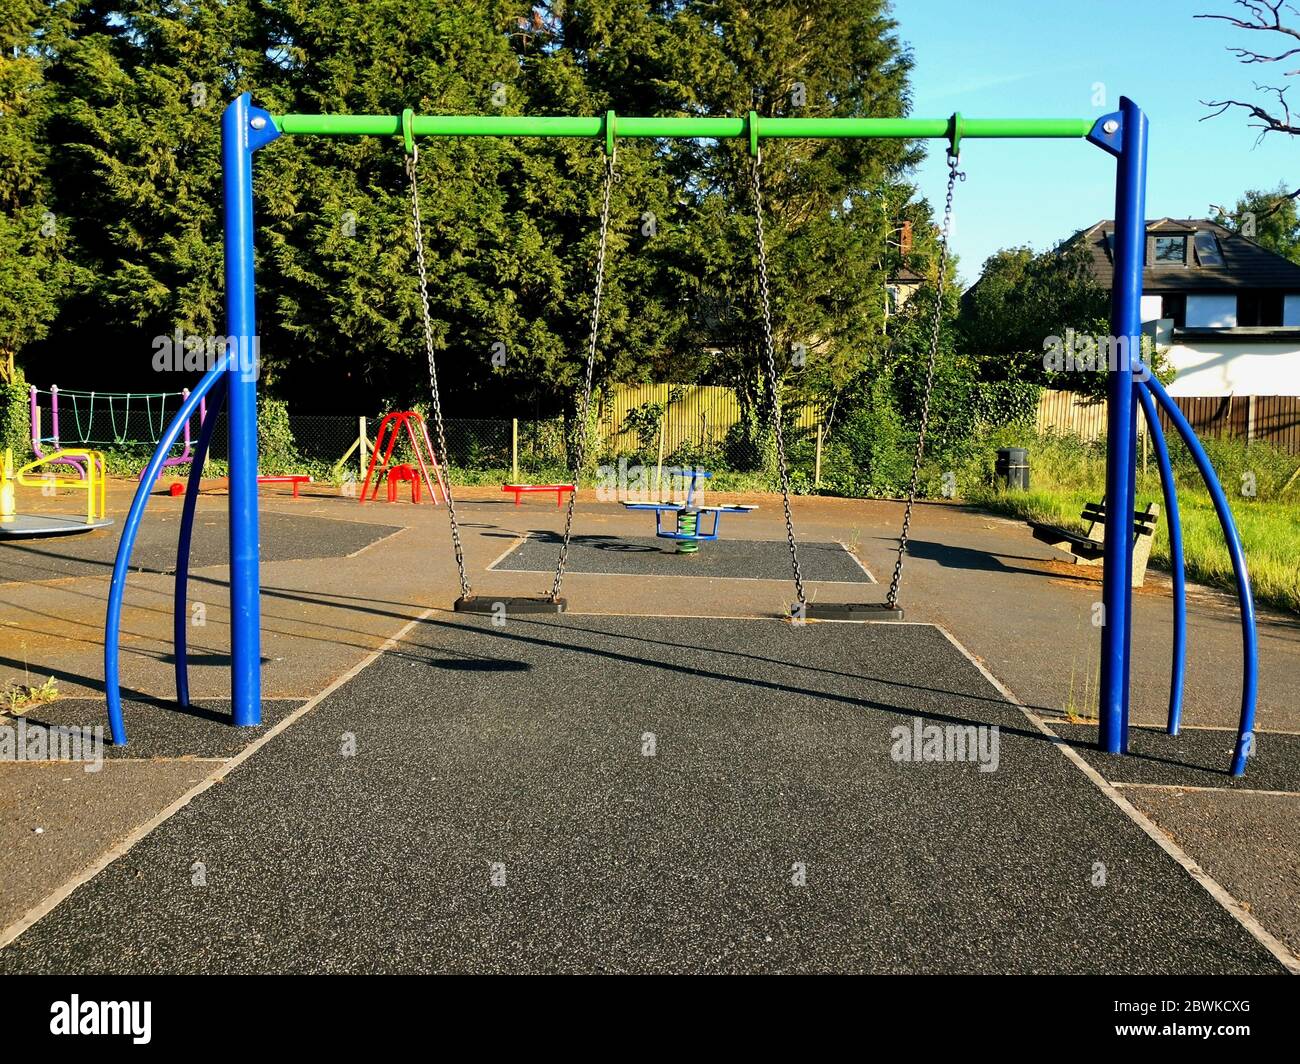 Colourful children's swings and play equipment in local municipal park Stock Photo